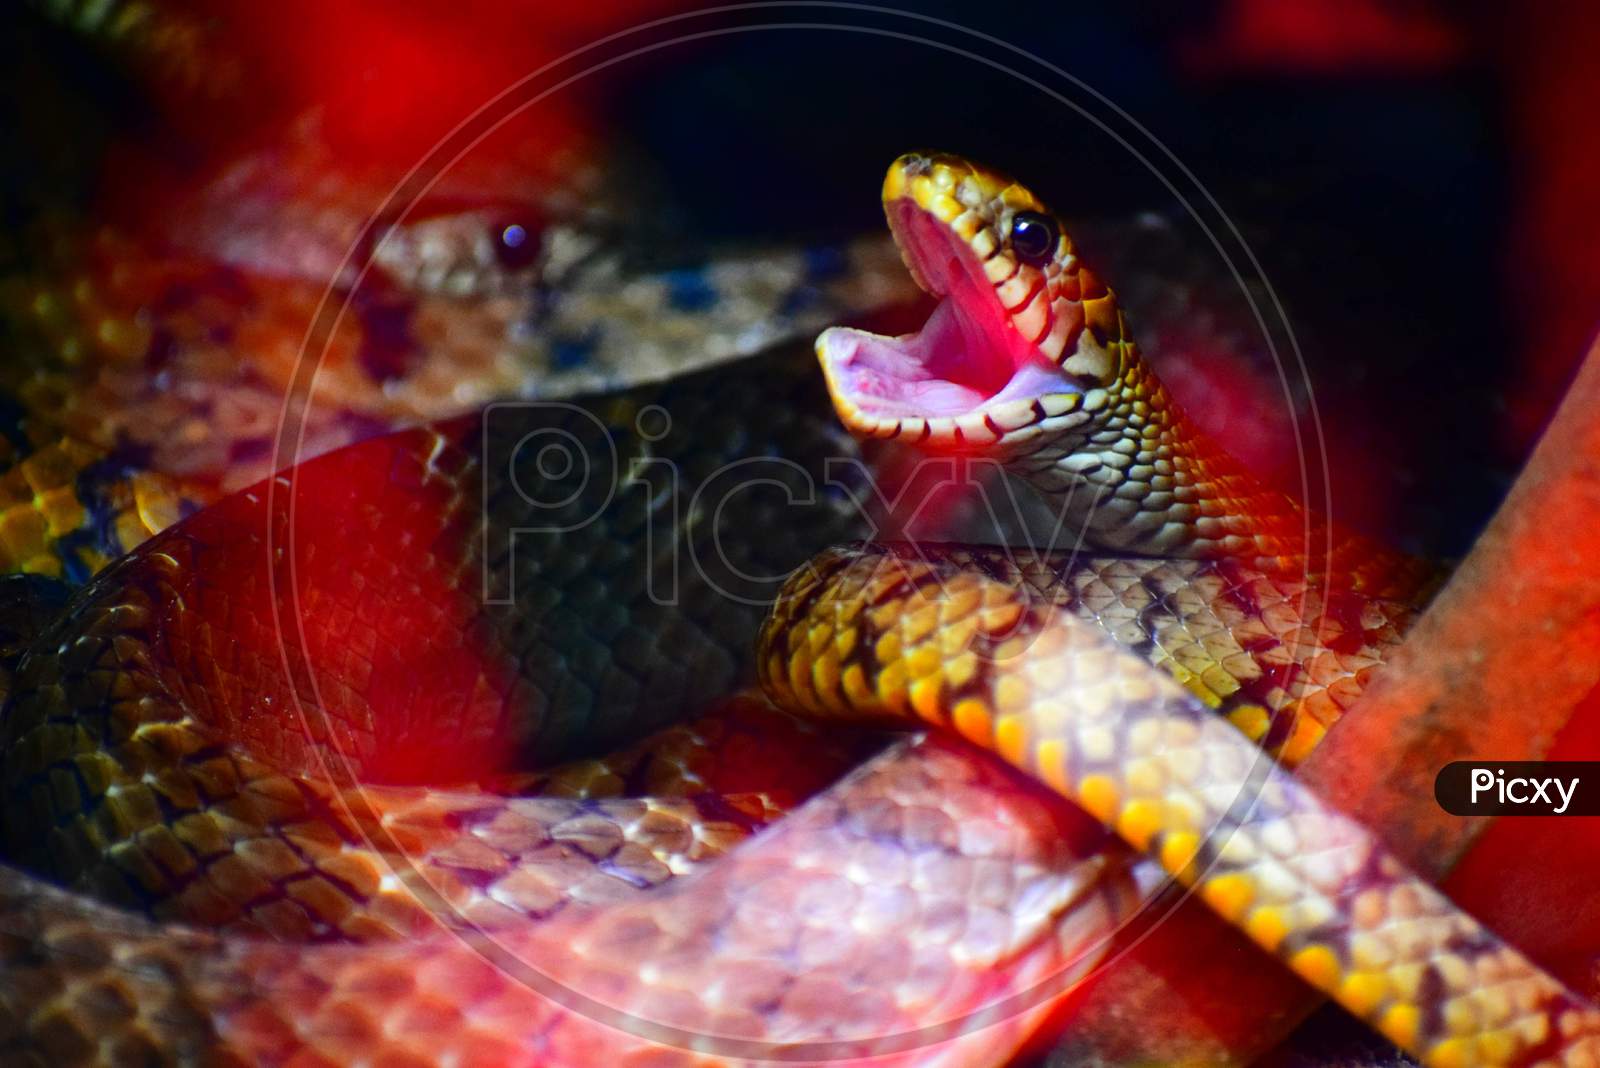 Coral snake open is mouth. My clicks